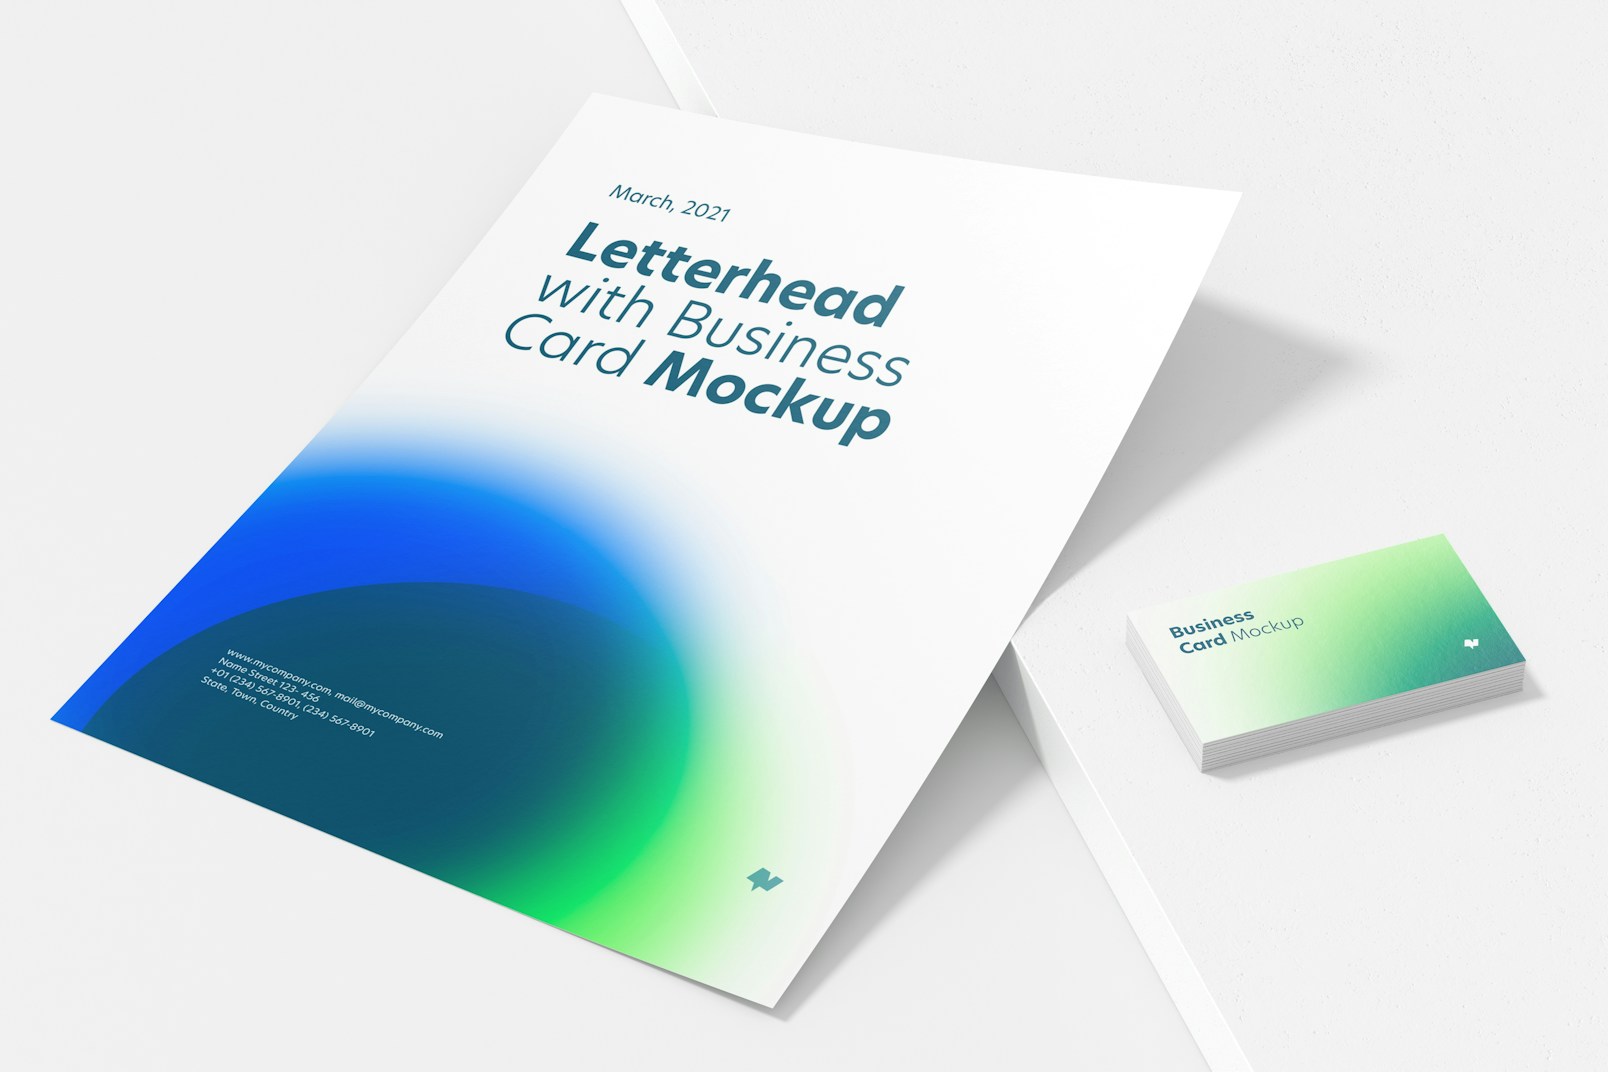 Letterhead with Business Card Mockup, Perspective